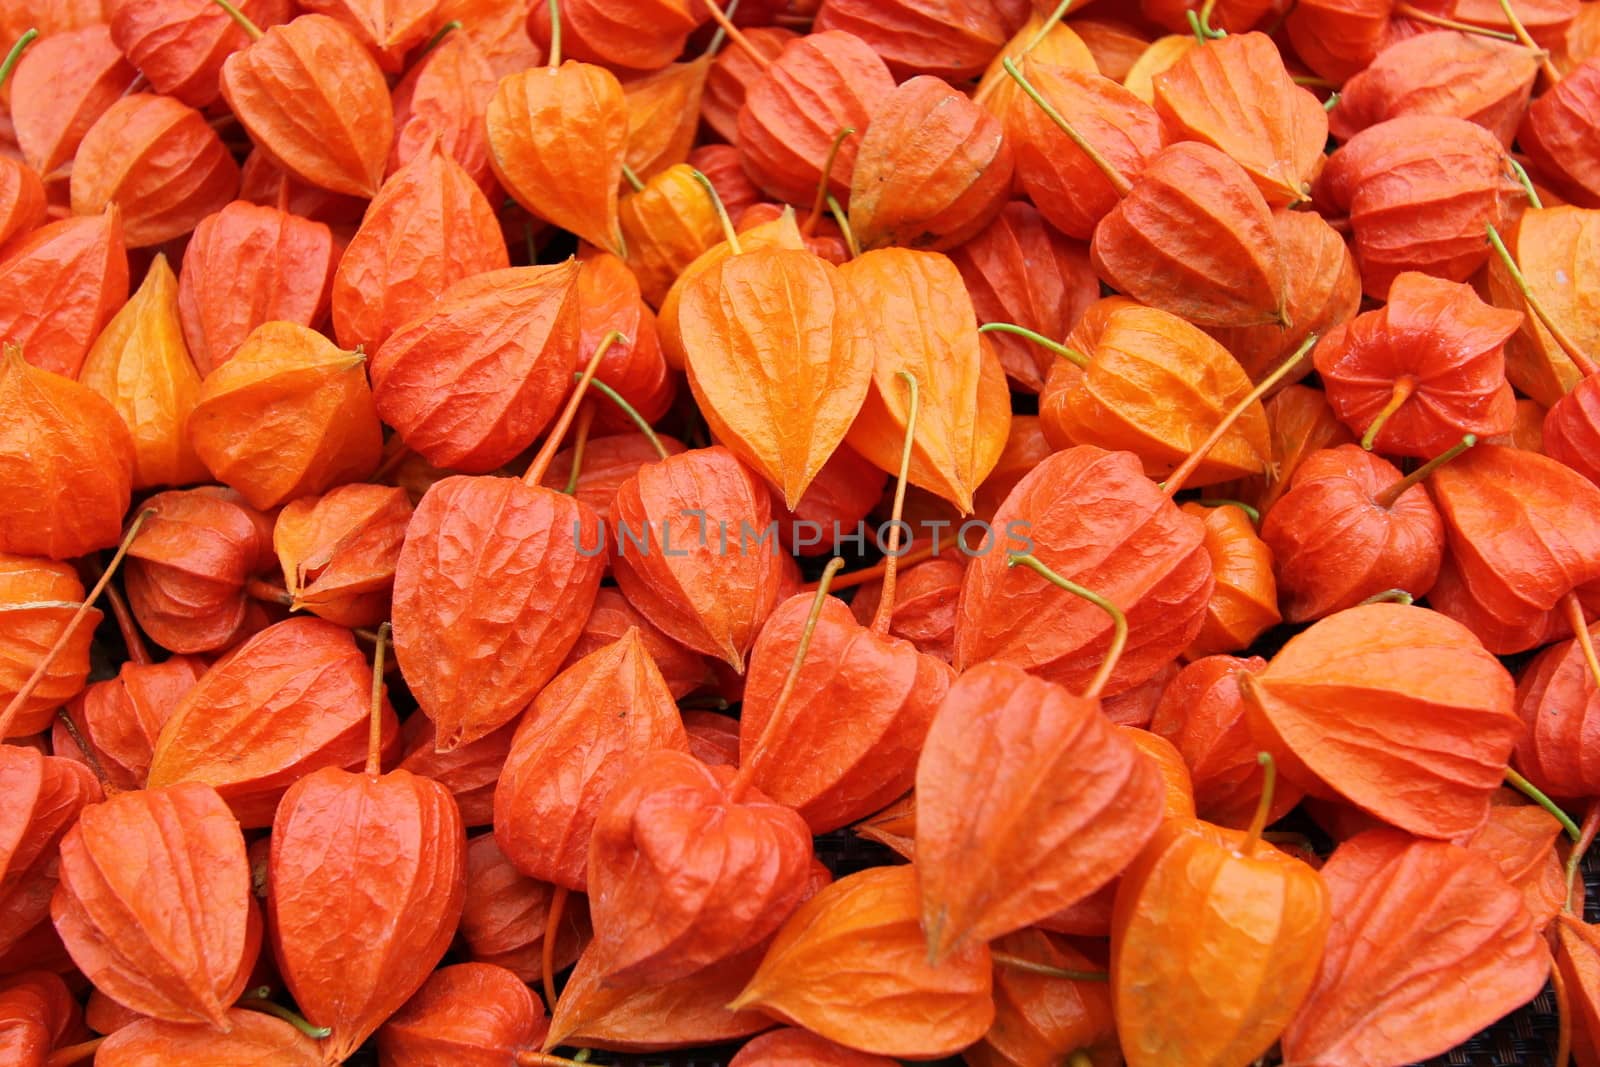 lot's of physalis